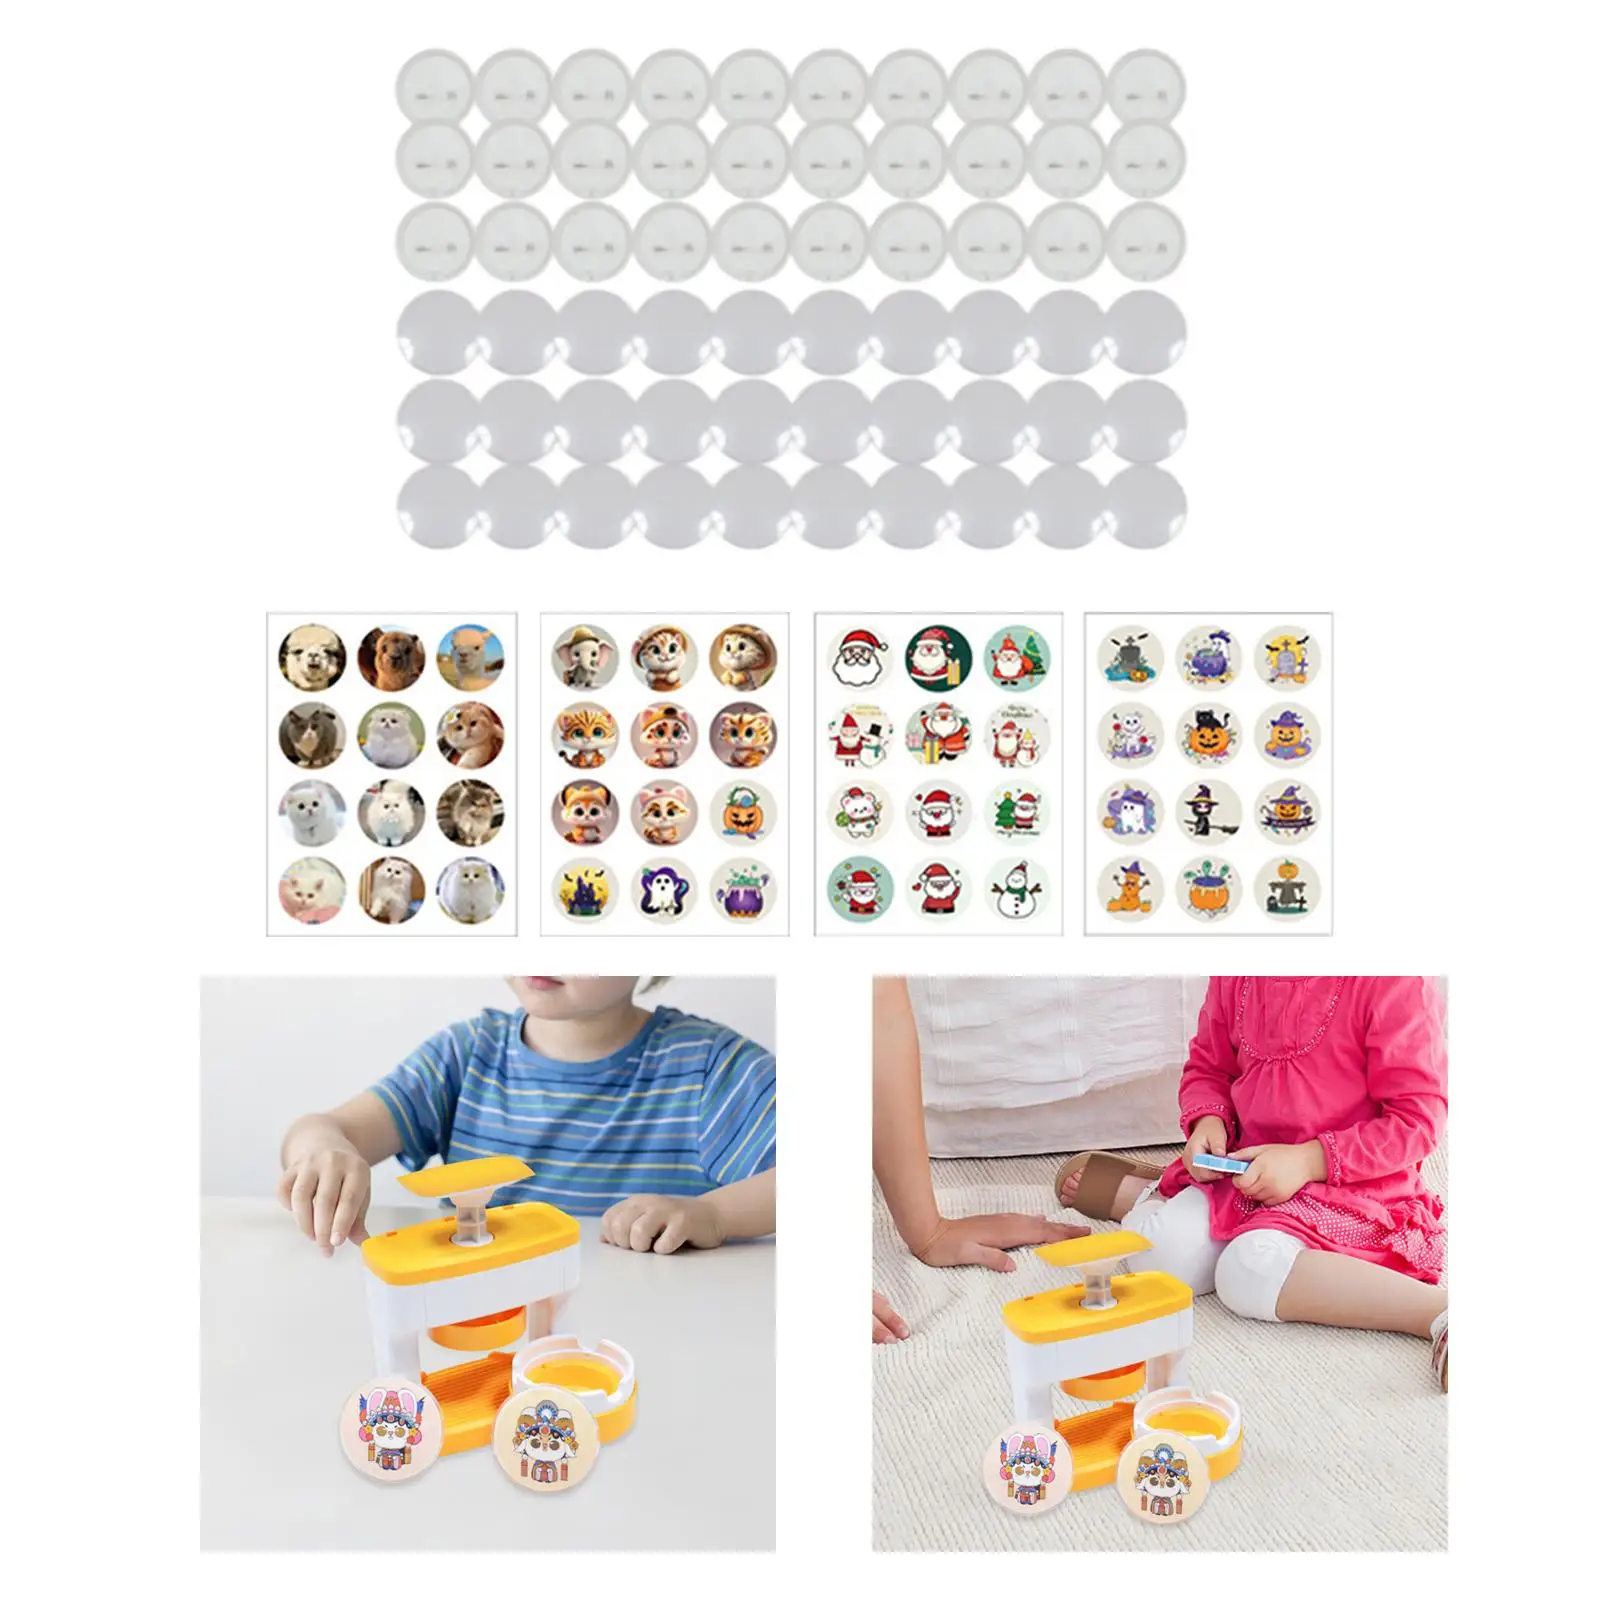 Button Badge Starter Sets Portable Easy Installation Upgrade Multiple Crafts for Children Boys Adults Teenagers Interactive Toys